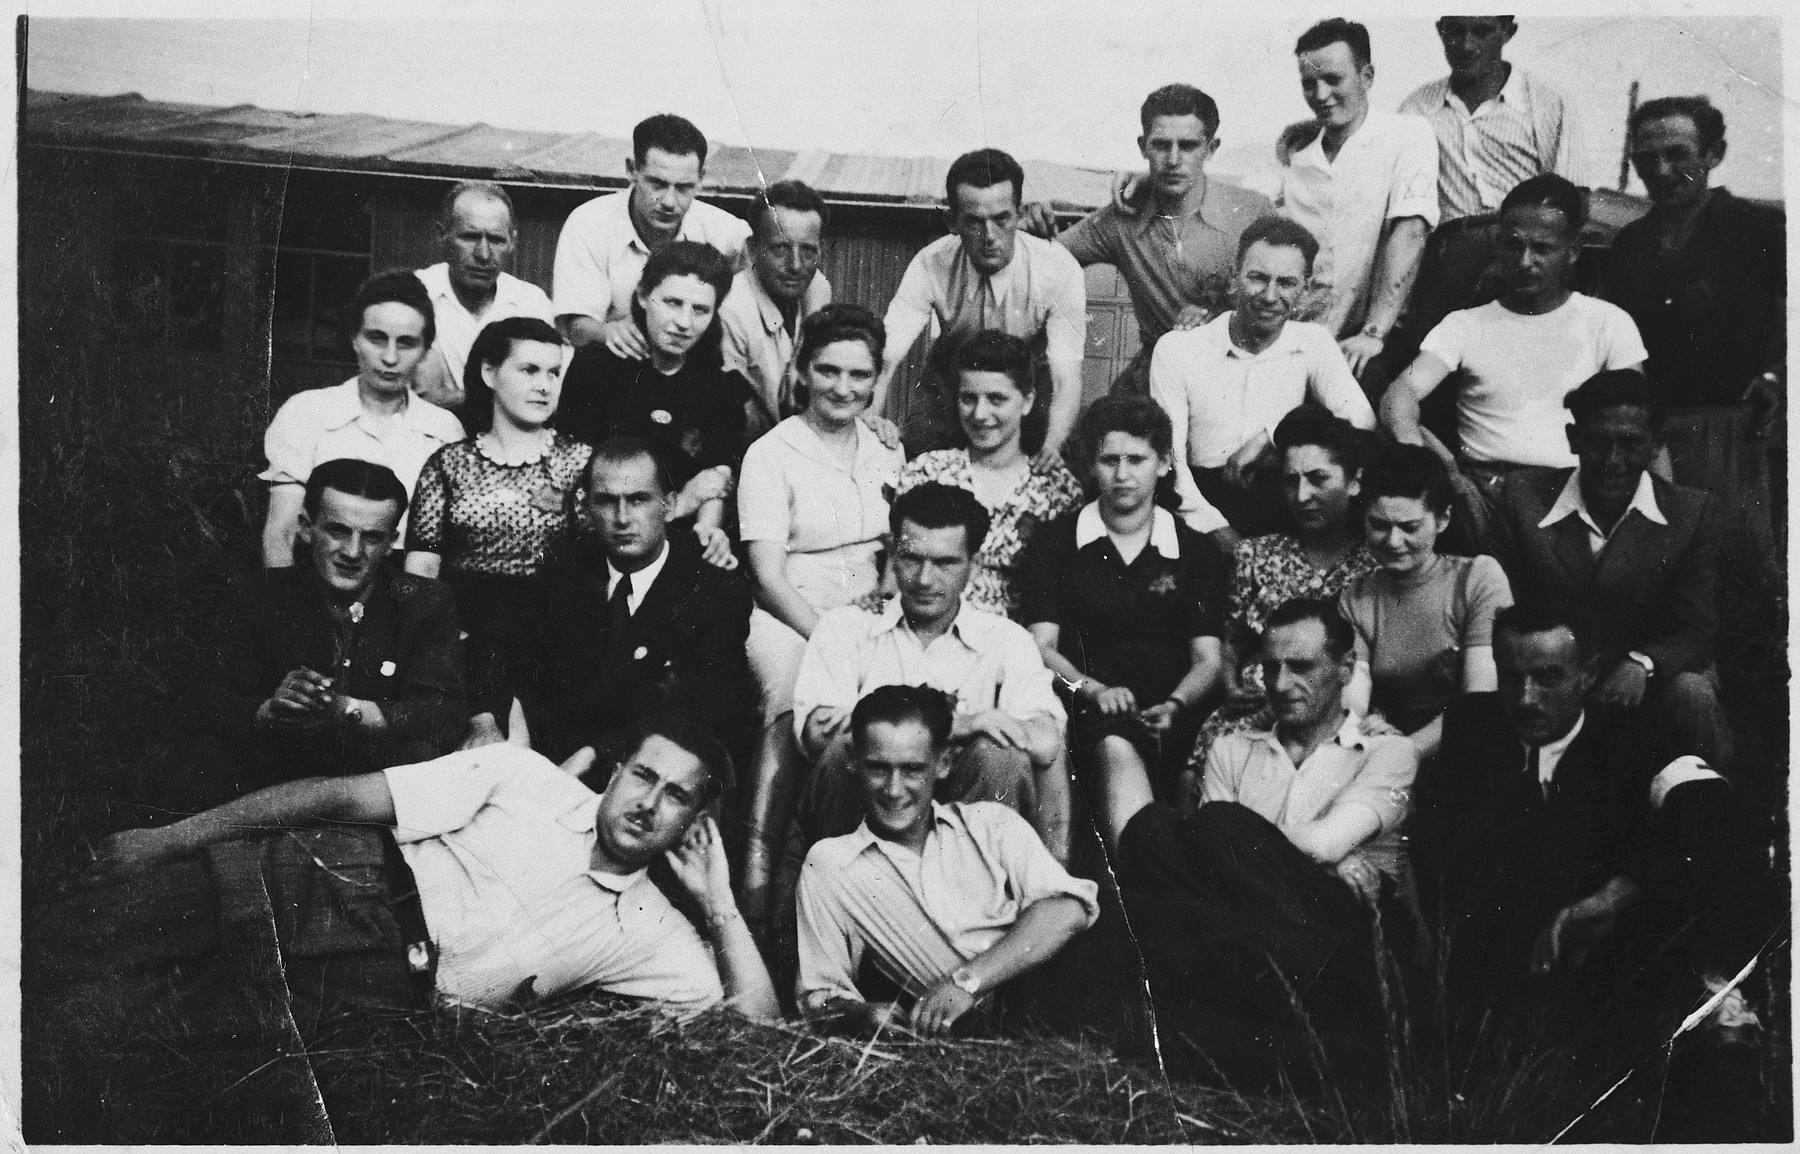 Prisoners in the Markstadt labor camp.

Among those pictured is Dr. Wolf Laitner, seated center, in the white shirt, directly behind the man leaning on his elbow.   Also pictured is Ruth Lieber (later Rydelnik) (second row from the top, third from the left).